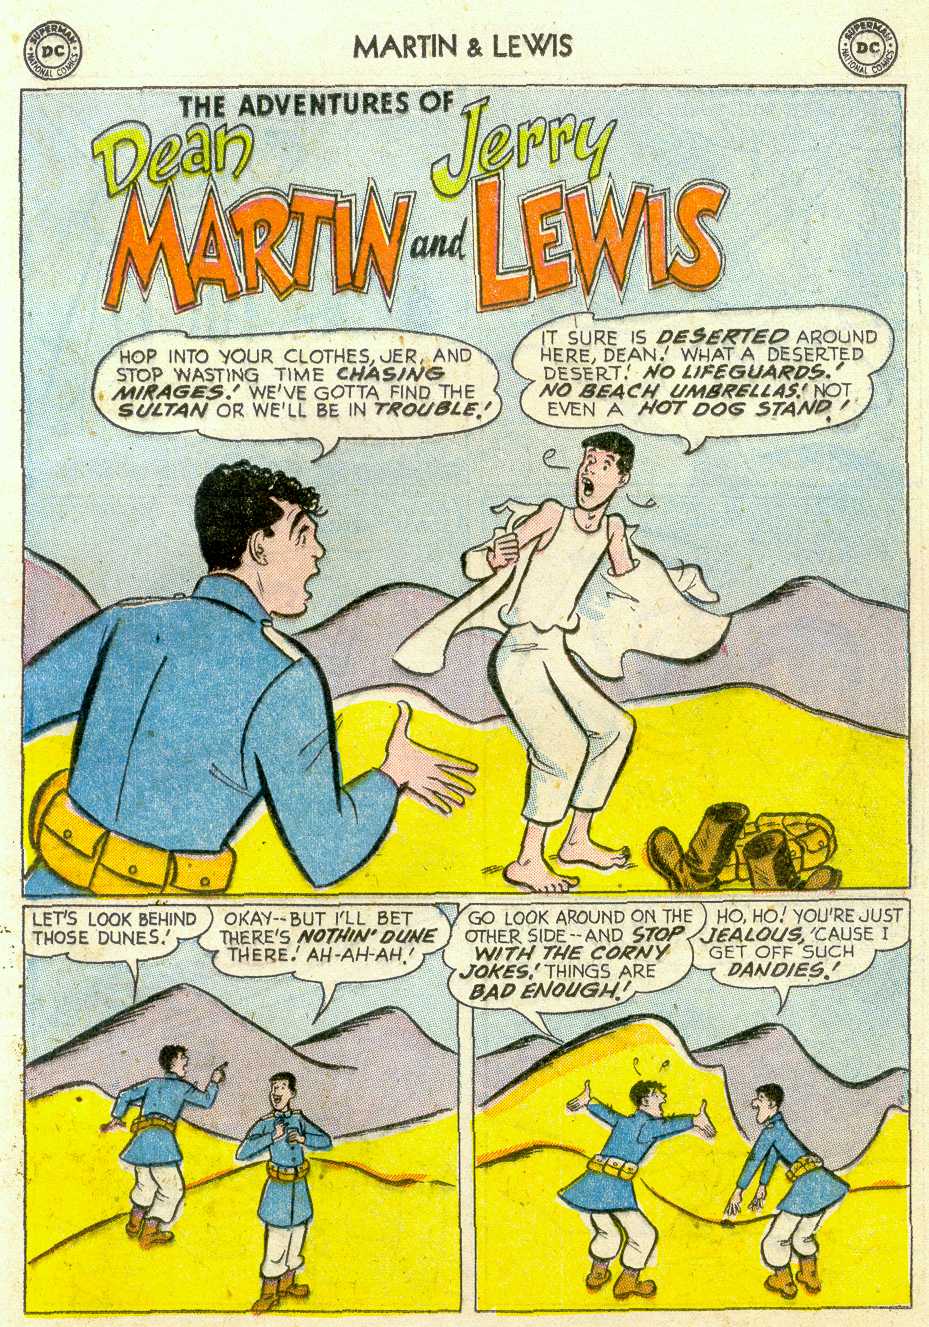 Read online The Adventures of Dean Martin and Jerry Lewis comic -  Issue #20 - 21